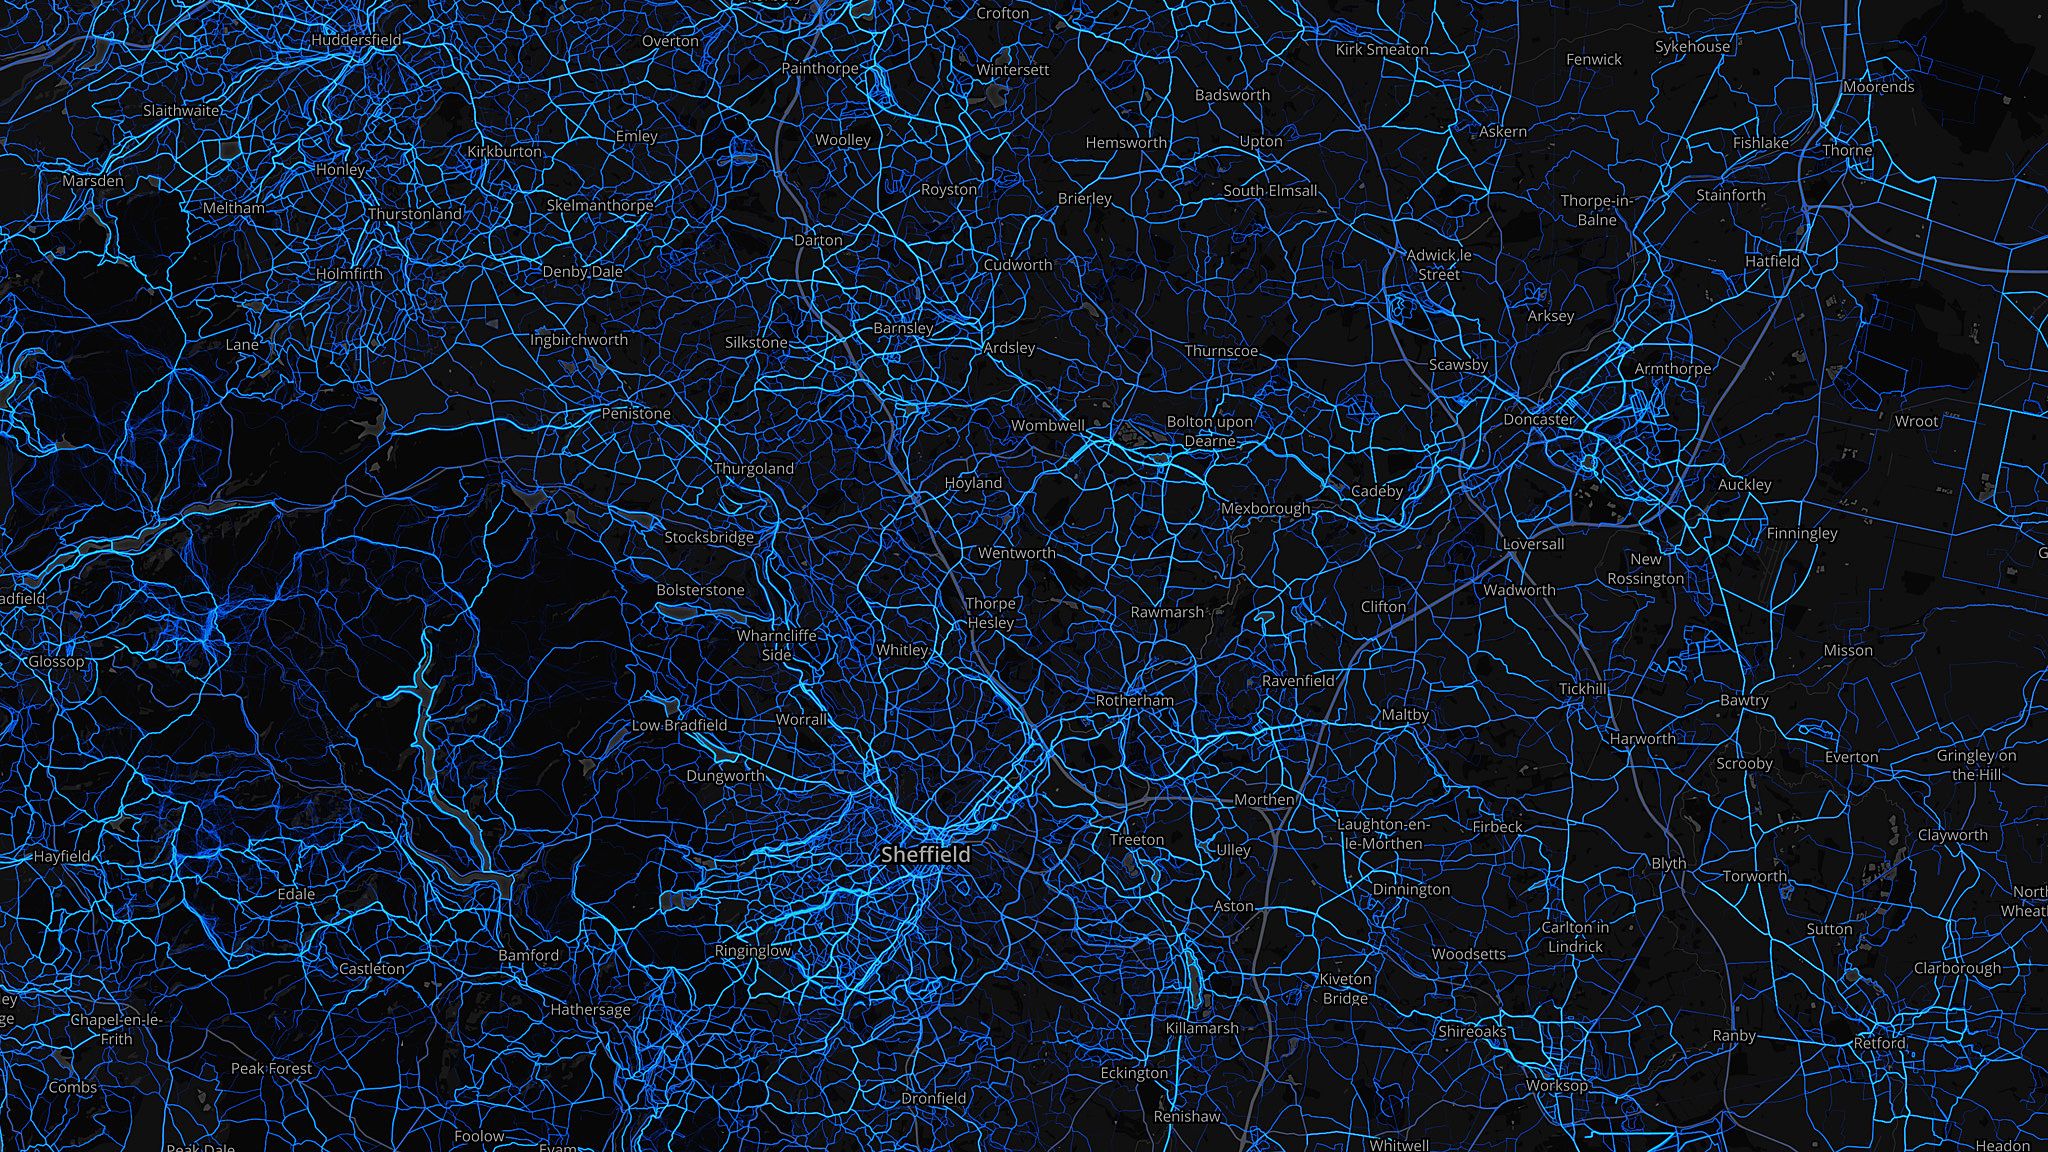 South Yorkshire - running routes (by Strava users 2015)